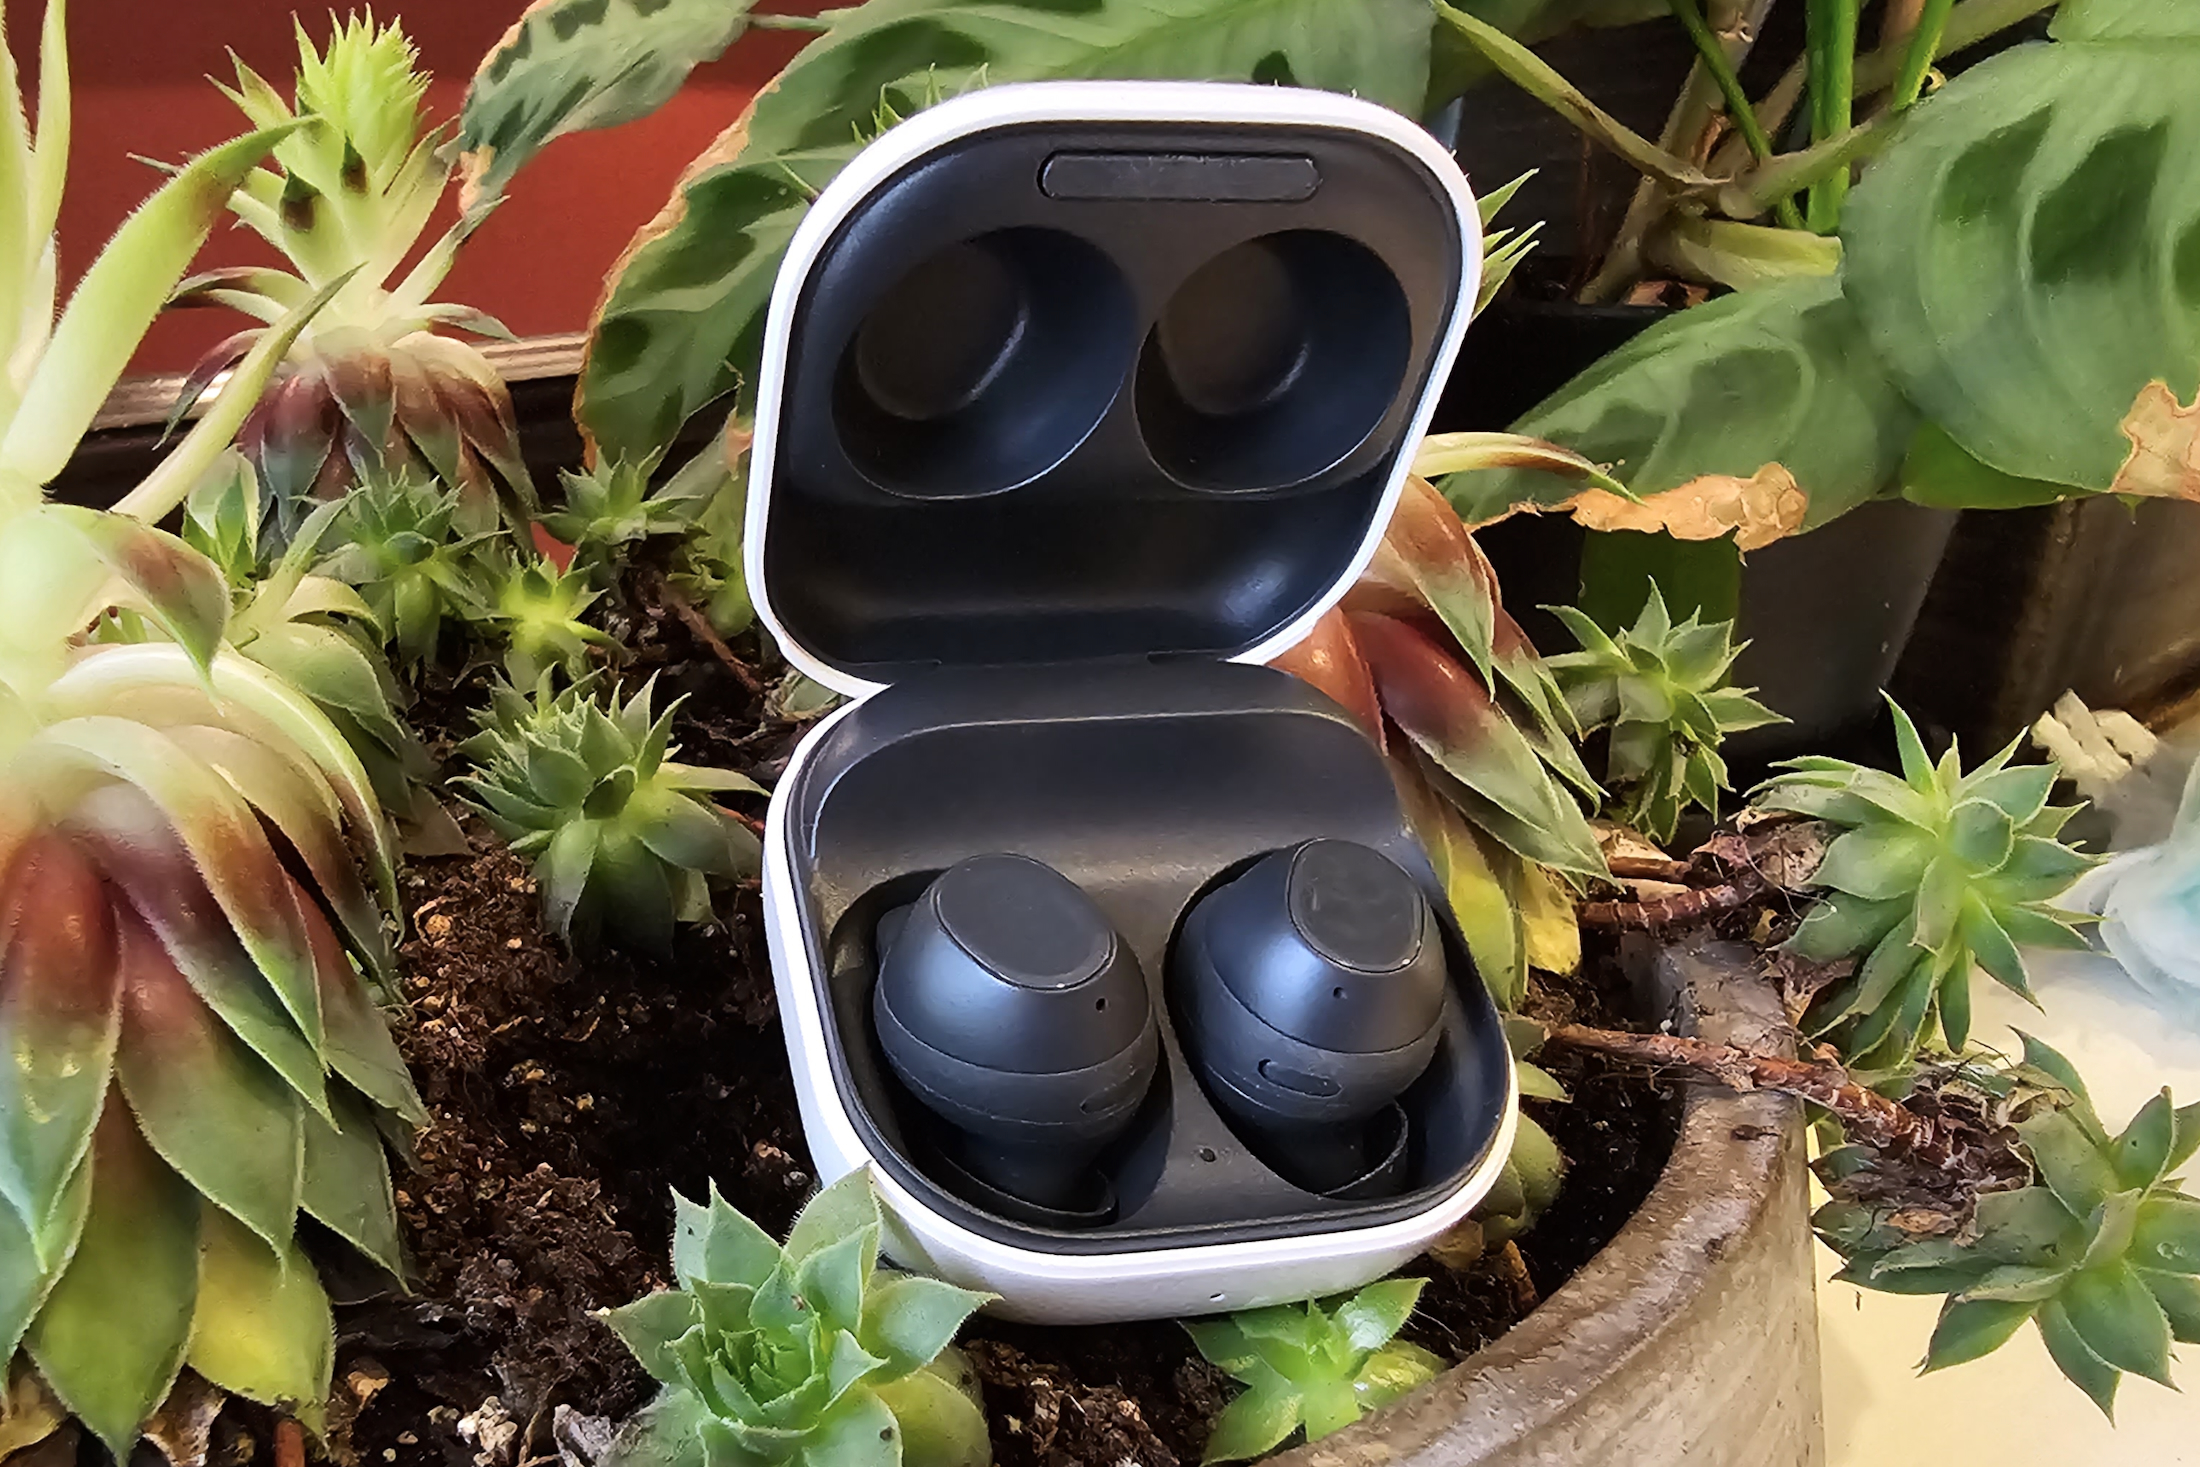 Redmi Buds 5 Pro: the brand's flagship True Wireless earbuds for $78